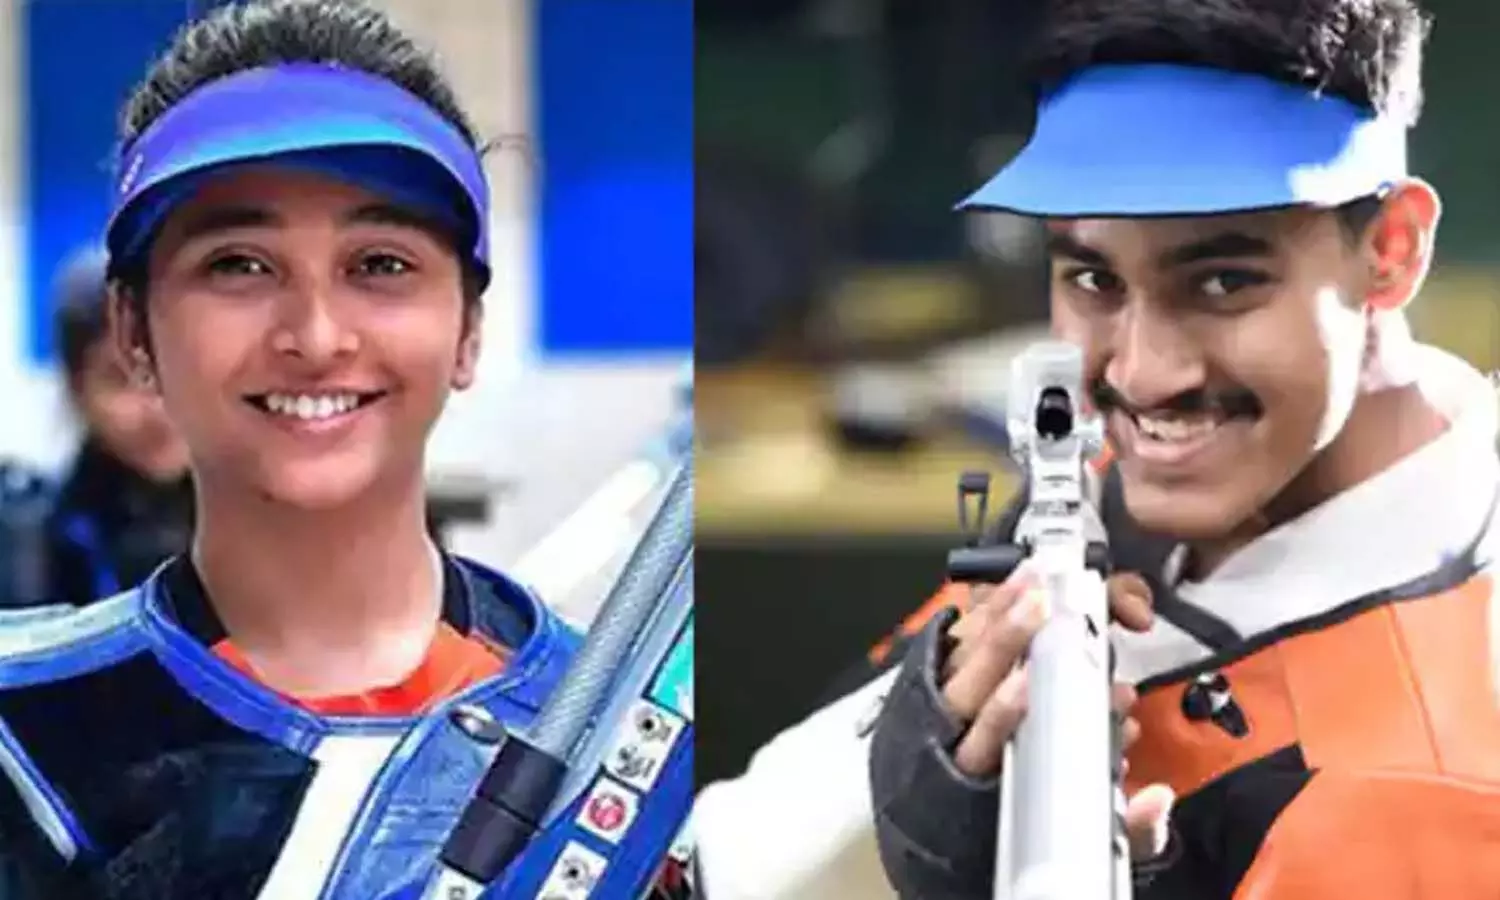 The team of Mehuli Ghosh and Tushar Mane won the gold medal in 10m Air Rifle